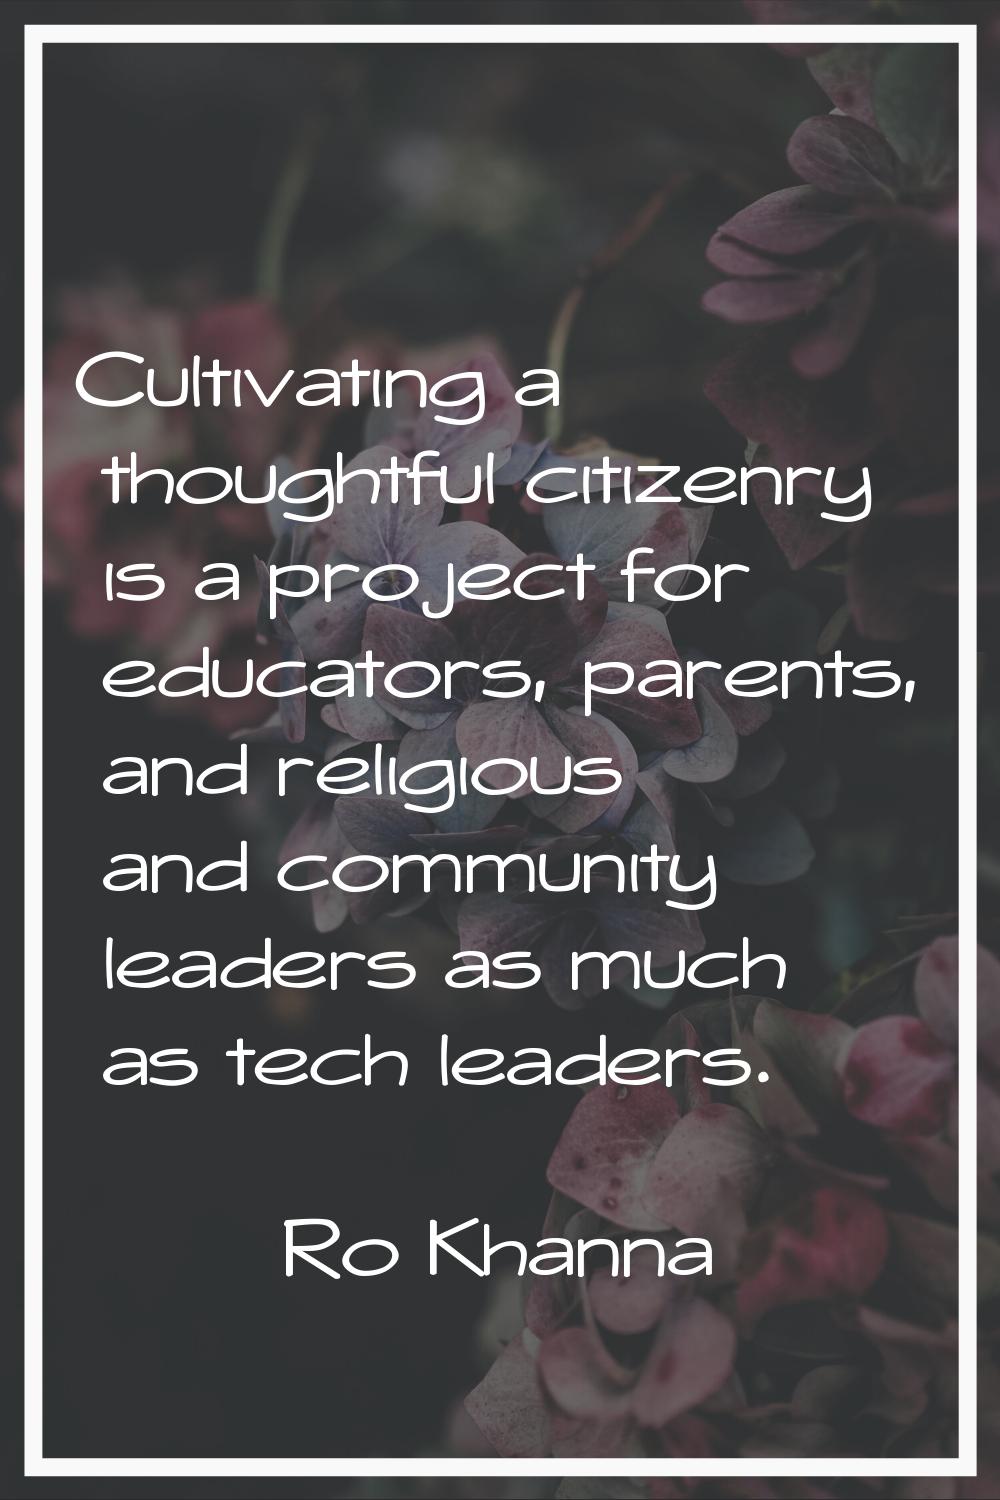 Cultivating a thoughtful citizenry is a project for educators, parents, and religious and community